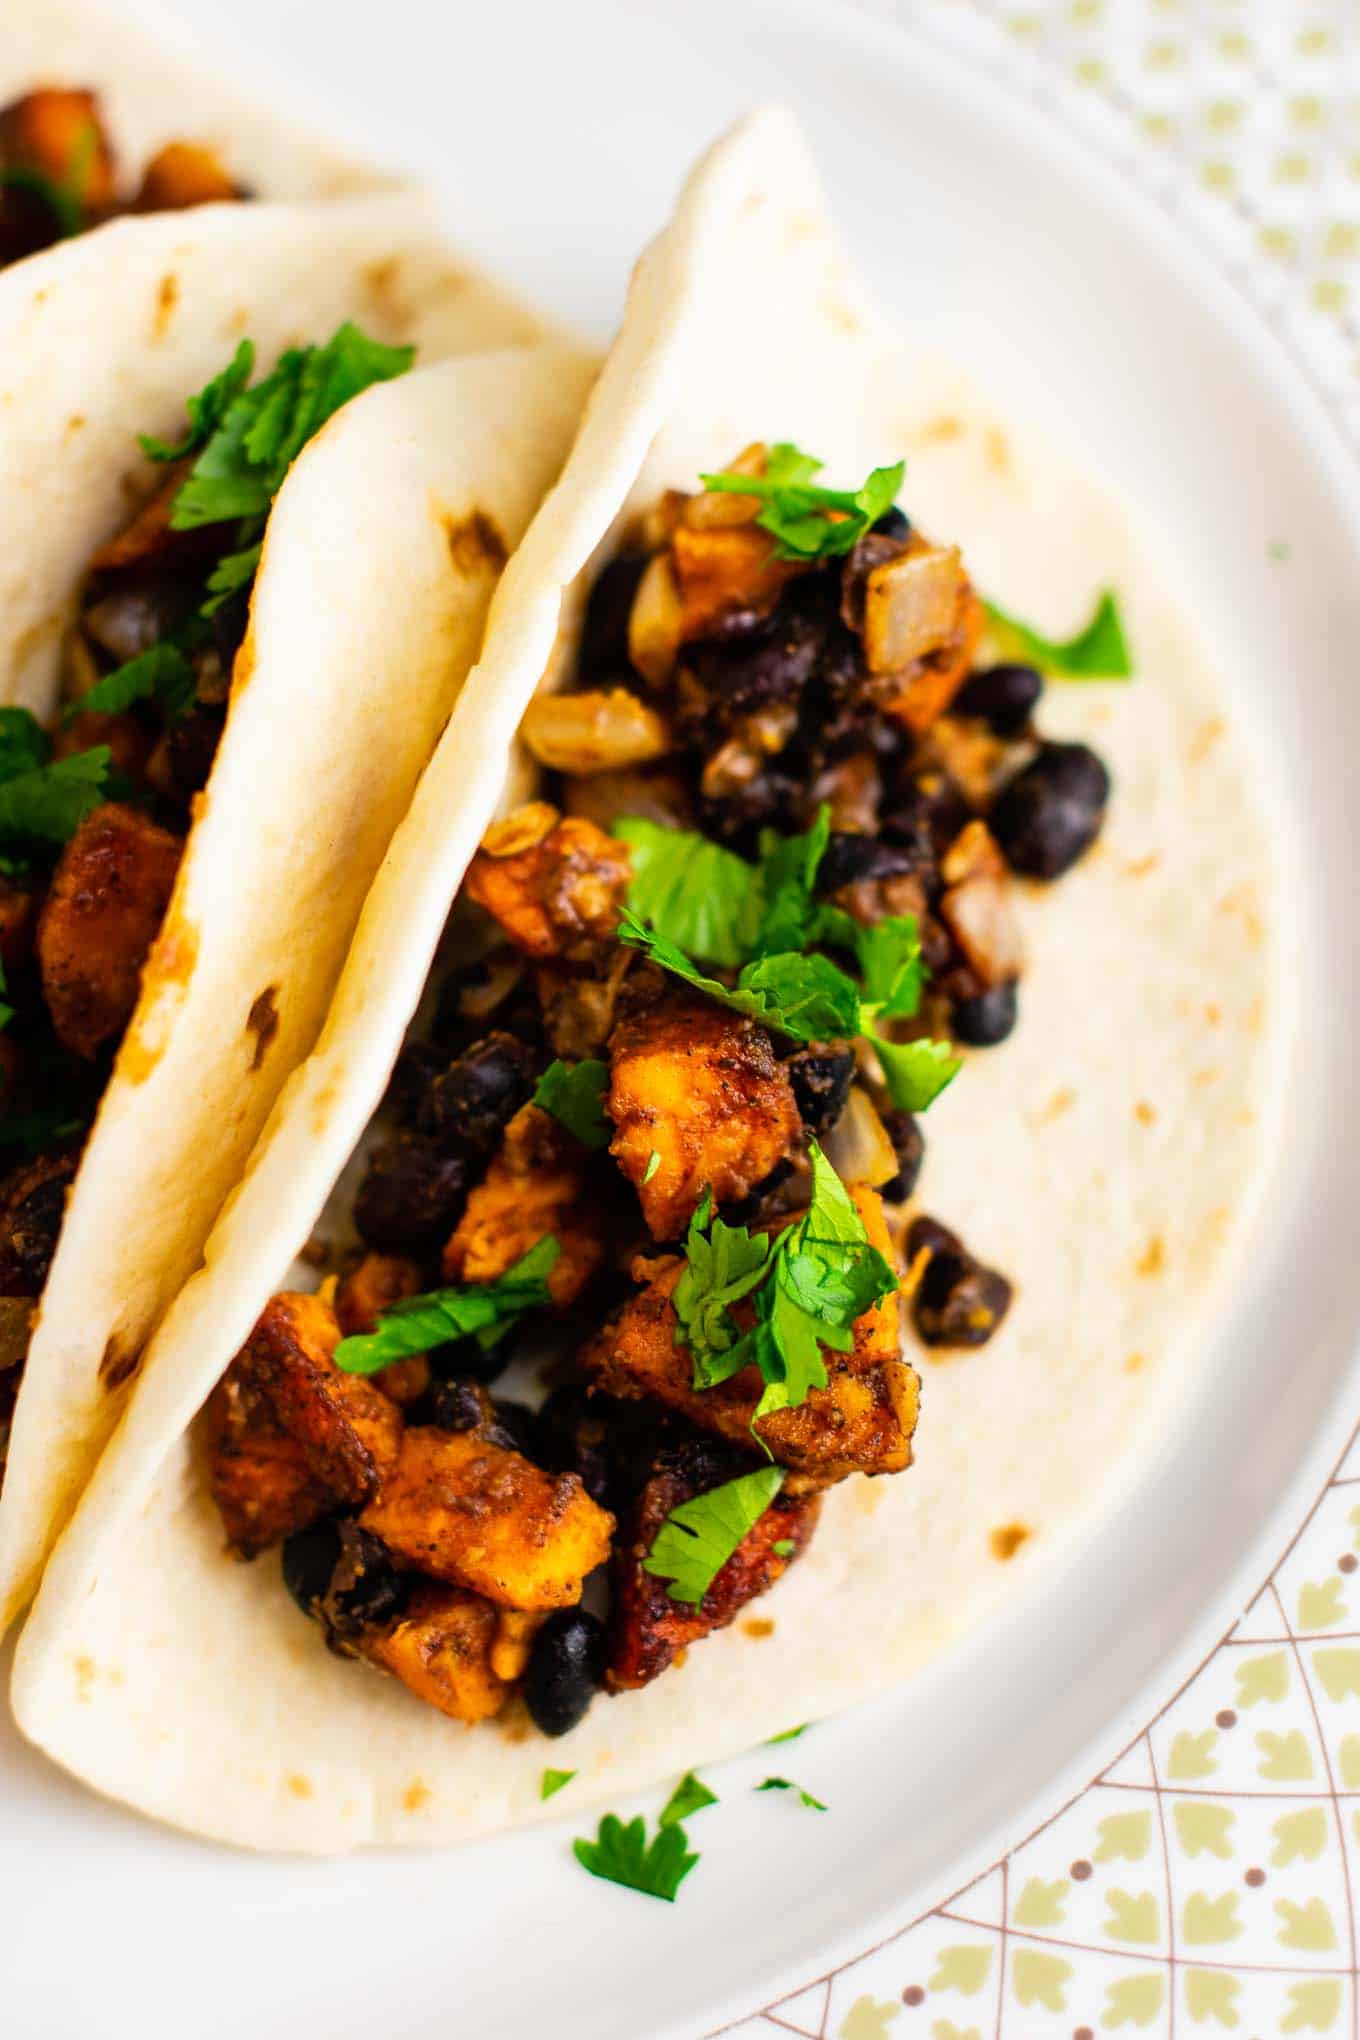 Sweet potato tacos with black beans and cilantro. Healthy, meatless, insanely delicious vegan dinner recipe! Serve with salsa and optional sour cream. #vegan #sweetpotatotacos #sweetpotatorecipes #sweetpotato #veganmexican #vegandinner #vegetarian #vegetariandinner #meatlessdinner #meatlesstacos #vegantacos